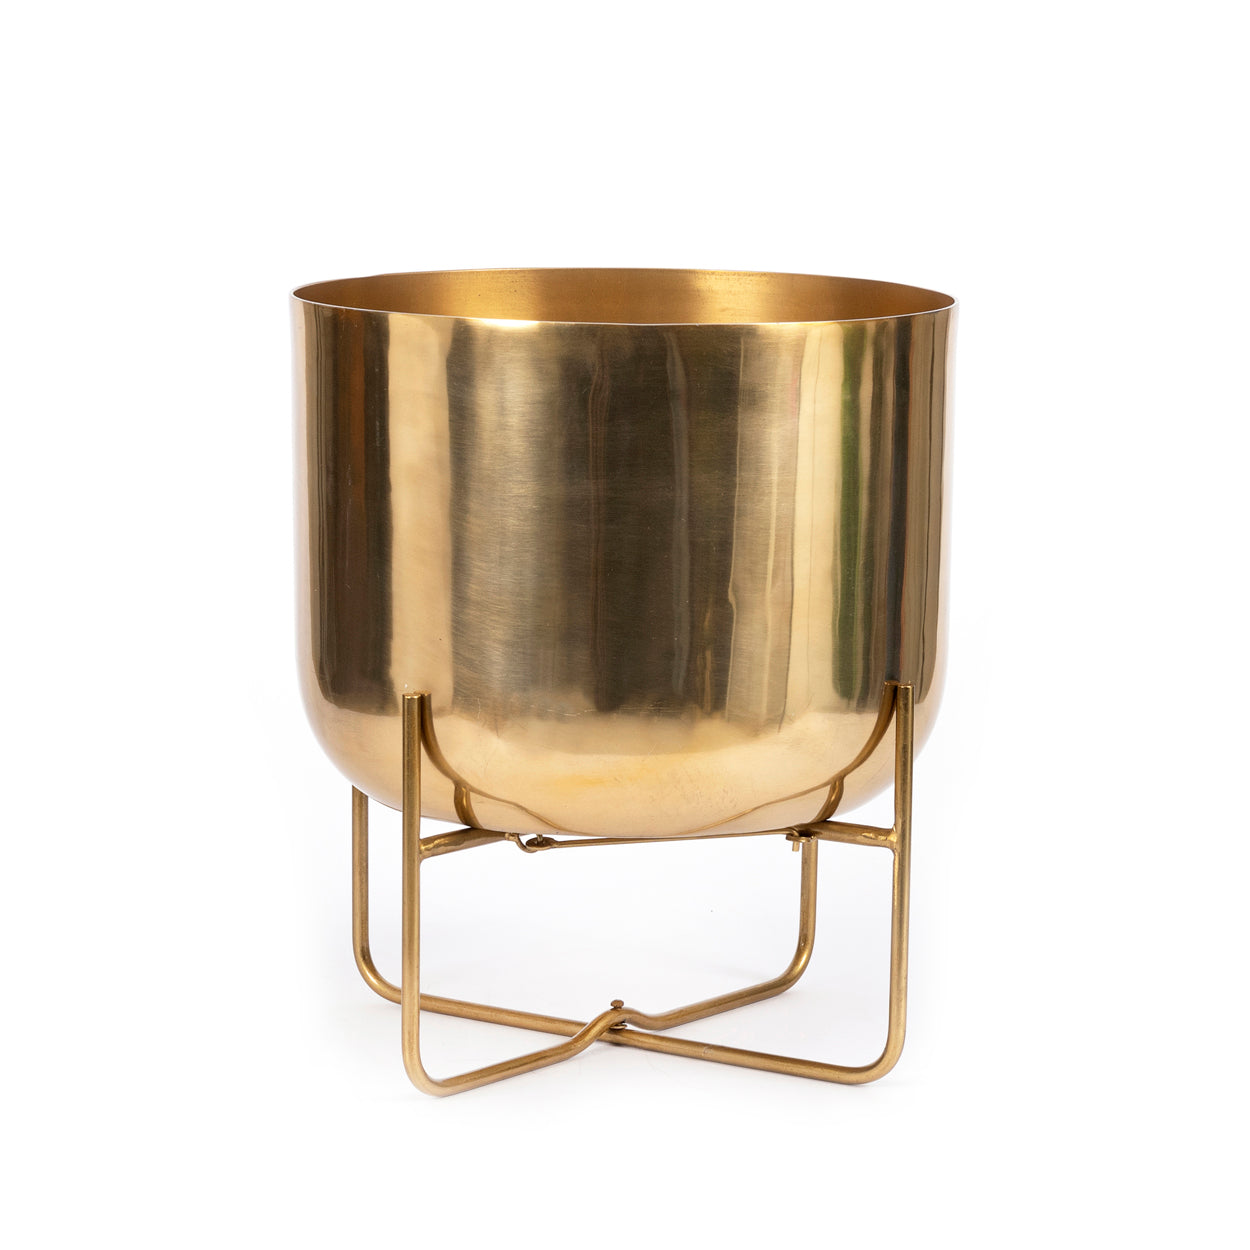 THE BRASS Planter On Stand extra large